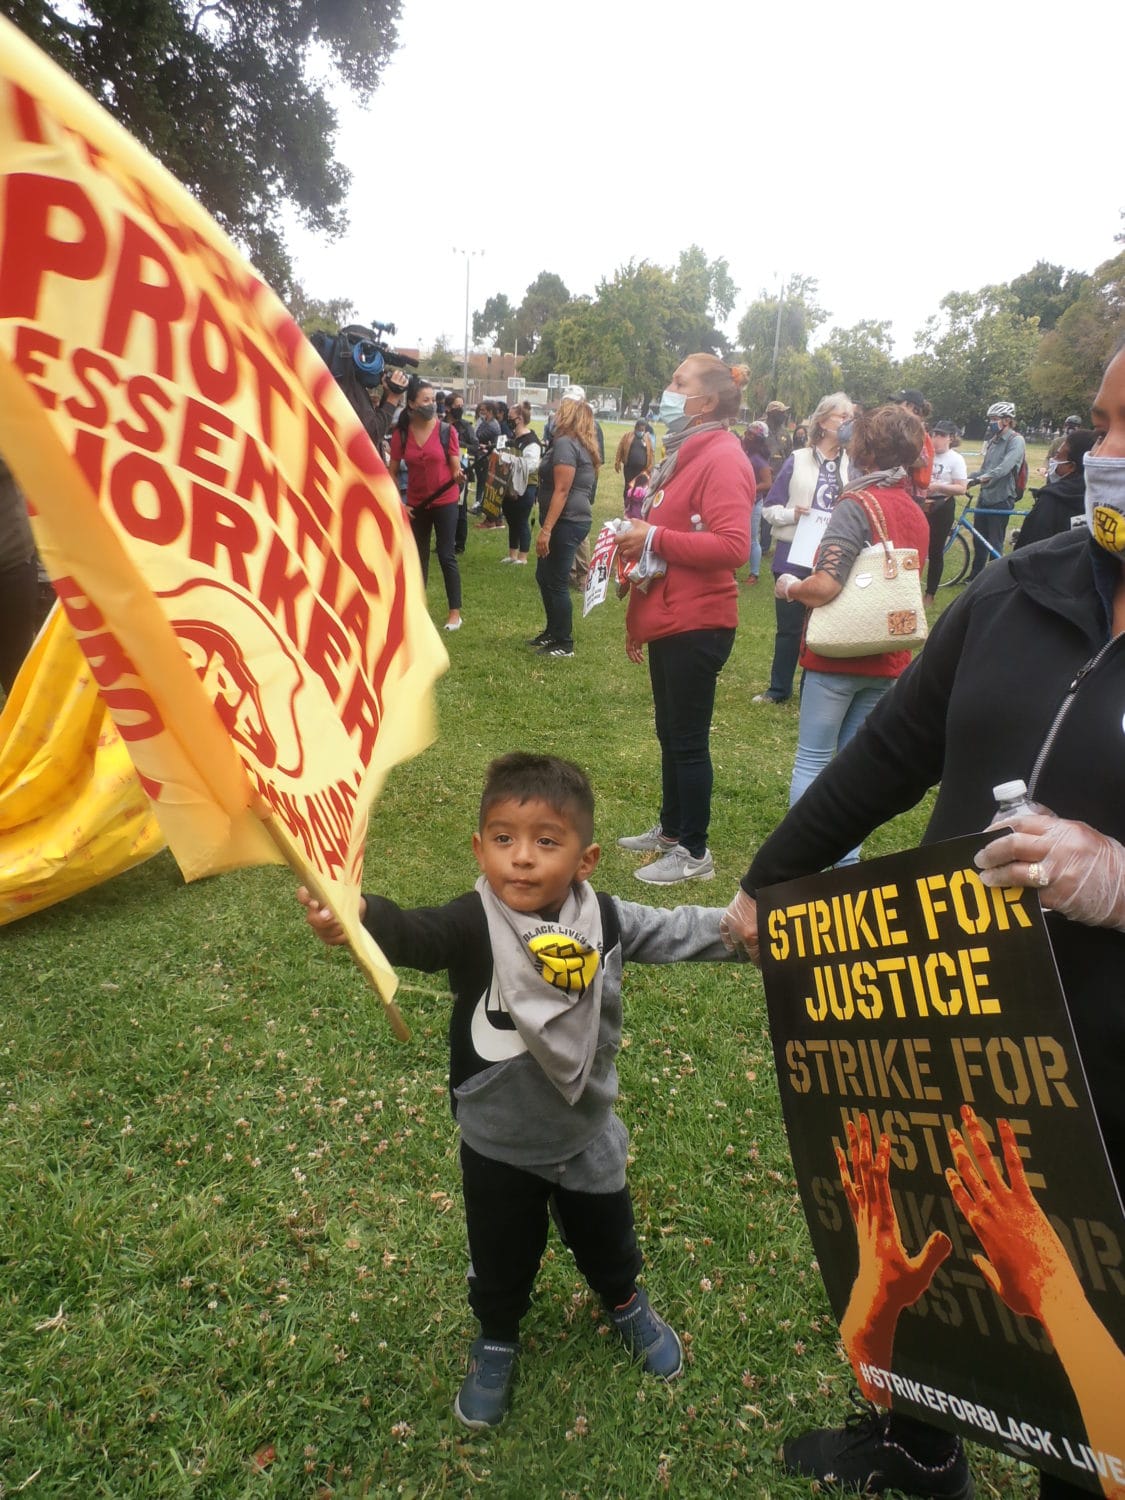 McDonalds-‘Strike-for-Justice-lil-boy-supports-strikers-Mosswood-Park-Oakland-by-Jahahara, Register, vote (y)our interests and continue organizing for power!, Culture Currents 